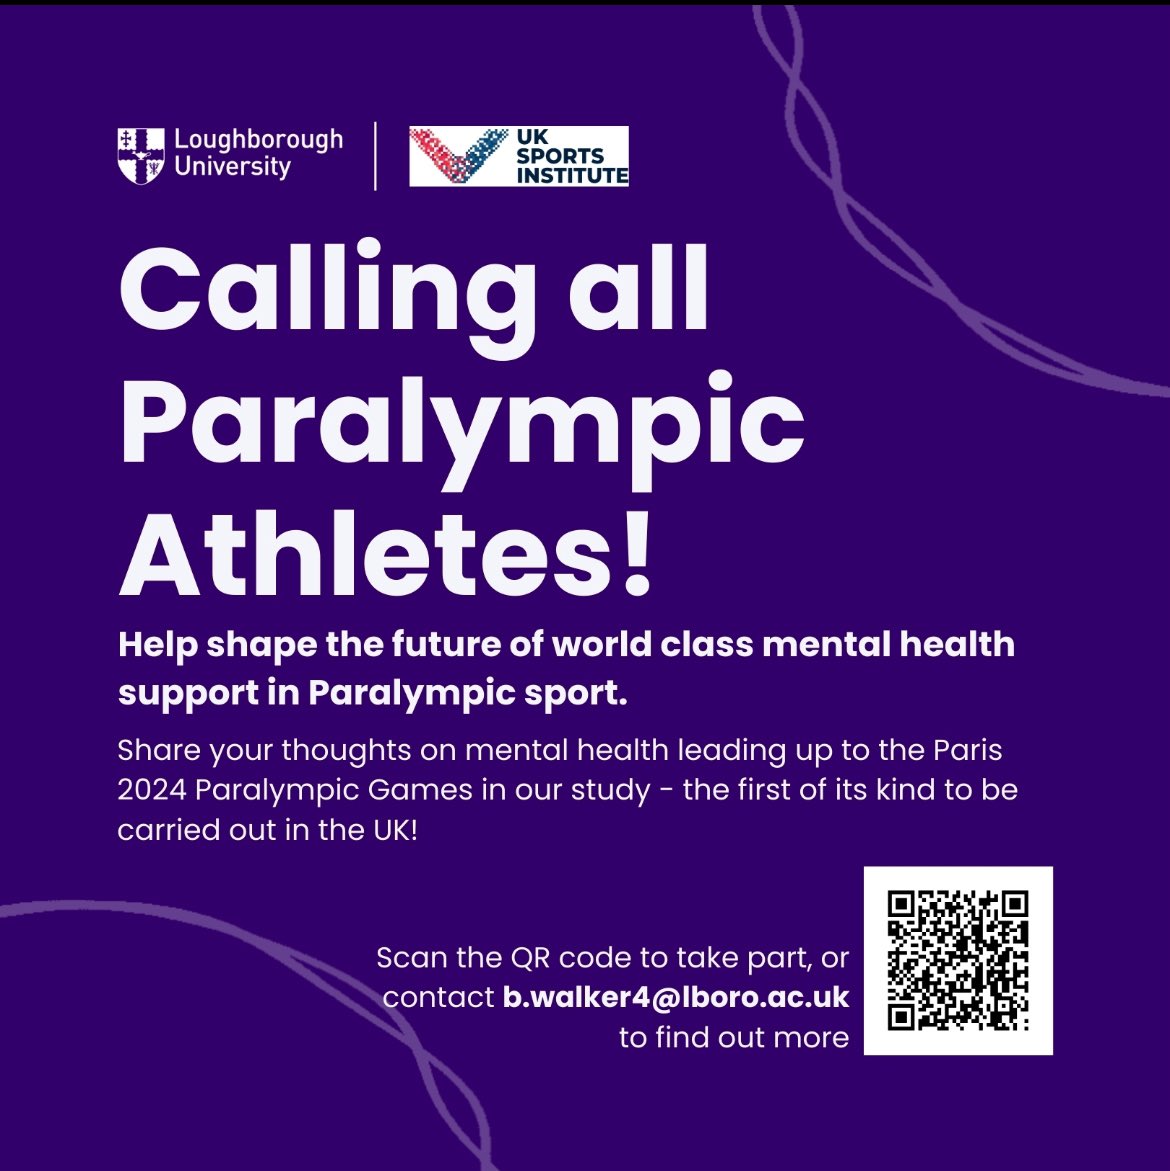 Call for participants! Together with the @UKSportsInst and @ParalympicsGB, we’re looking for Paralympic athletes in the UK to take part in our study to better understand mental health in Paralympic sport.   Email b.walker4@lboro.ac.uk or scan the QR code to take part